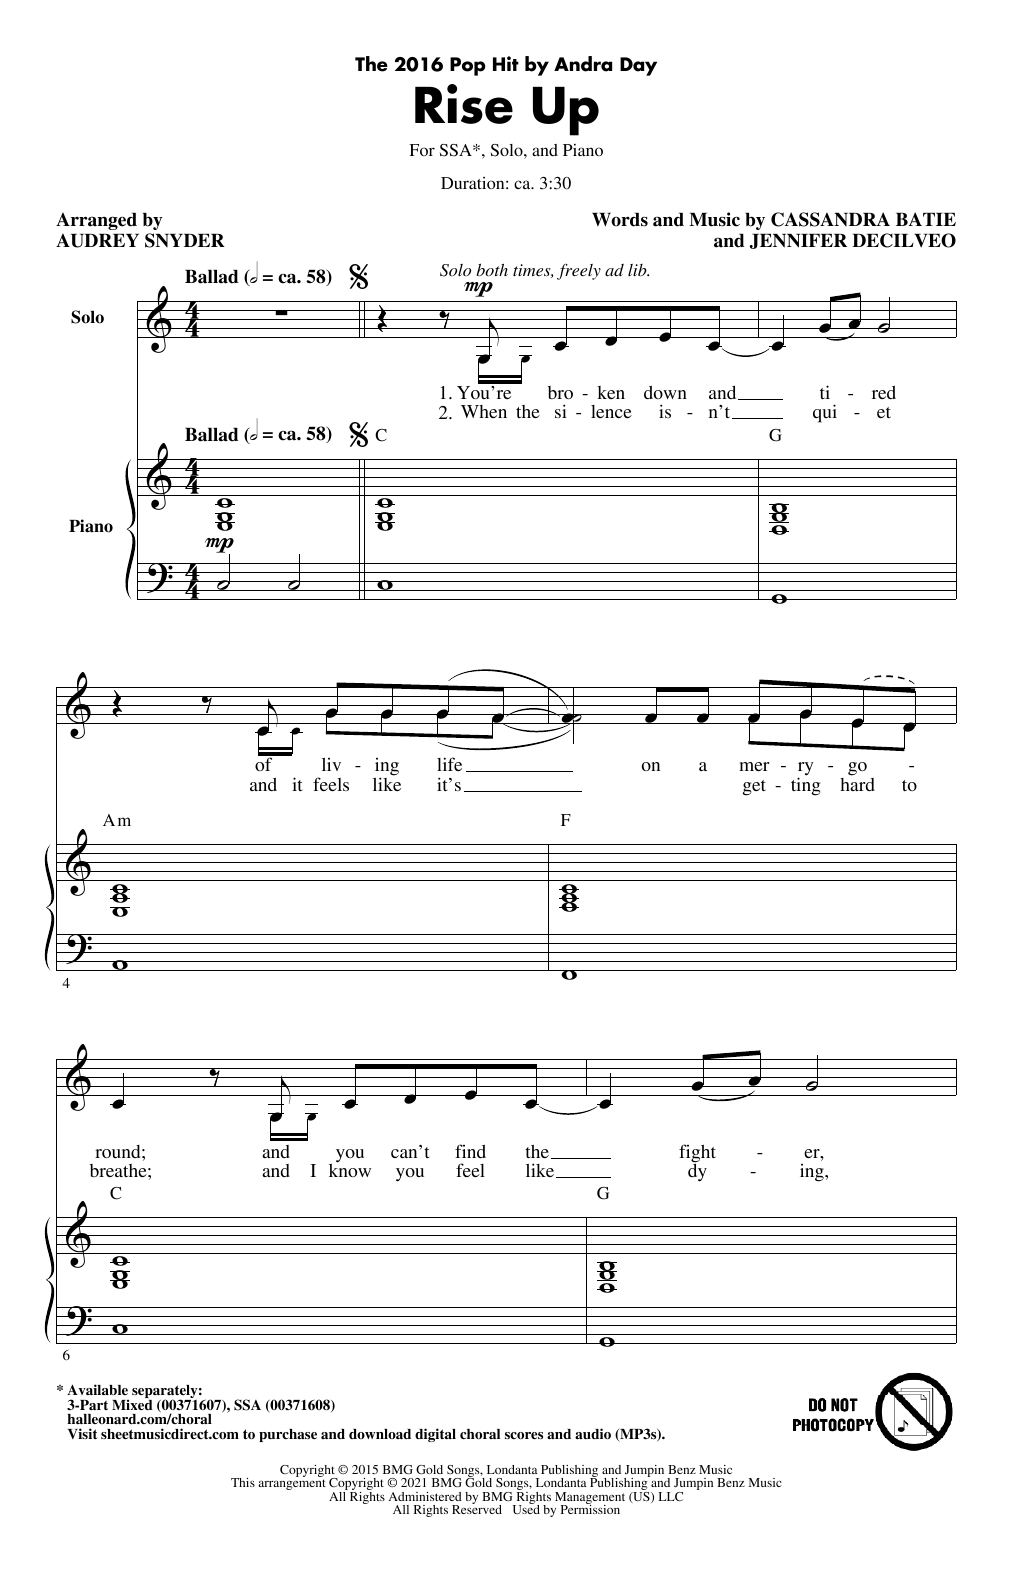 andra-day-rise-up-arr-audrey-snyder-sheet-music-download